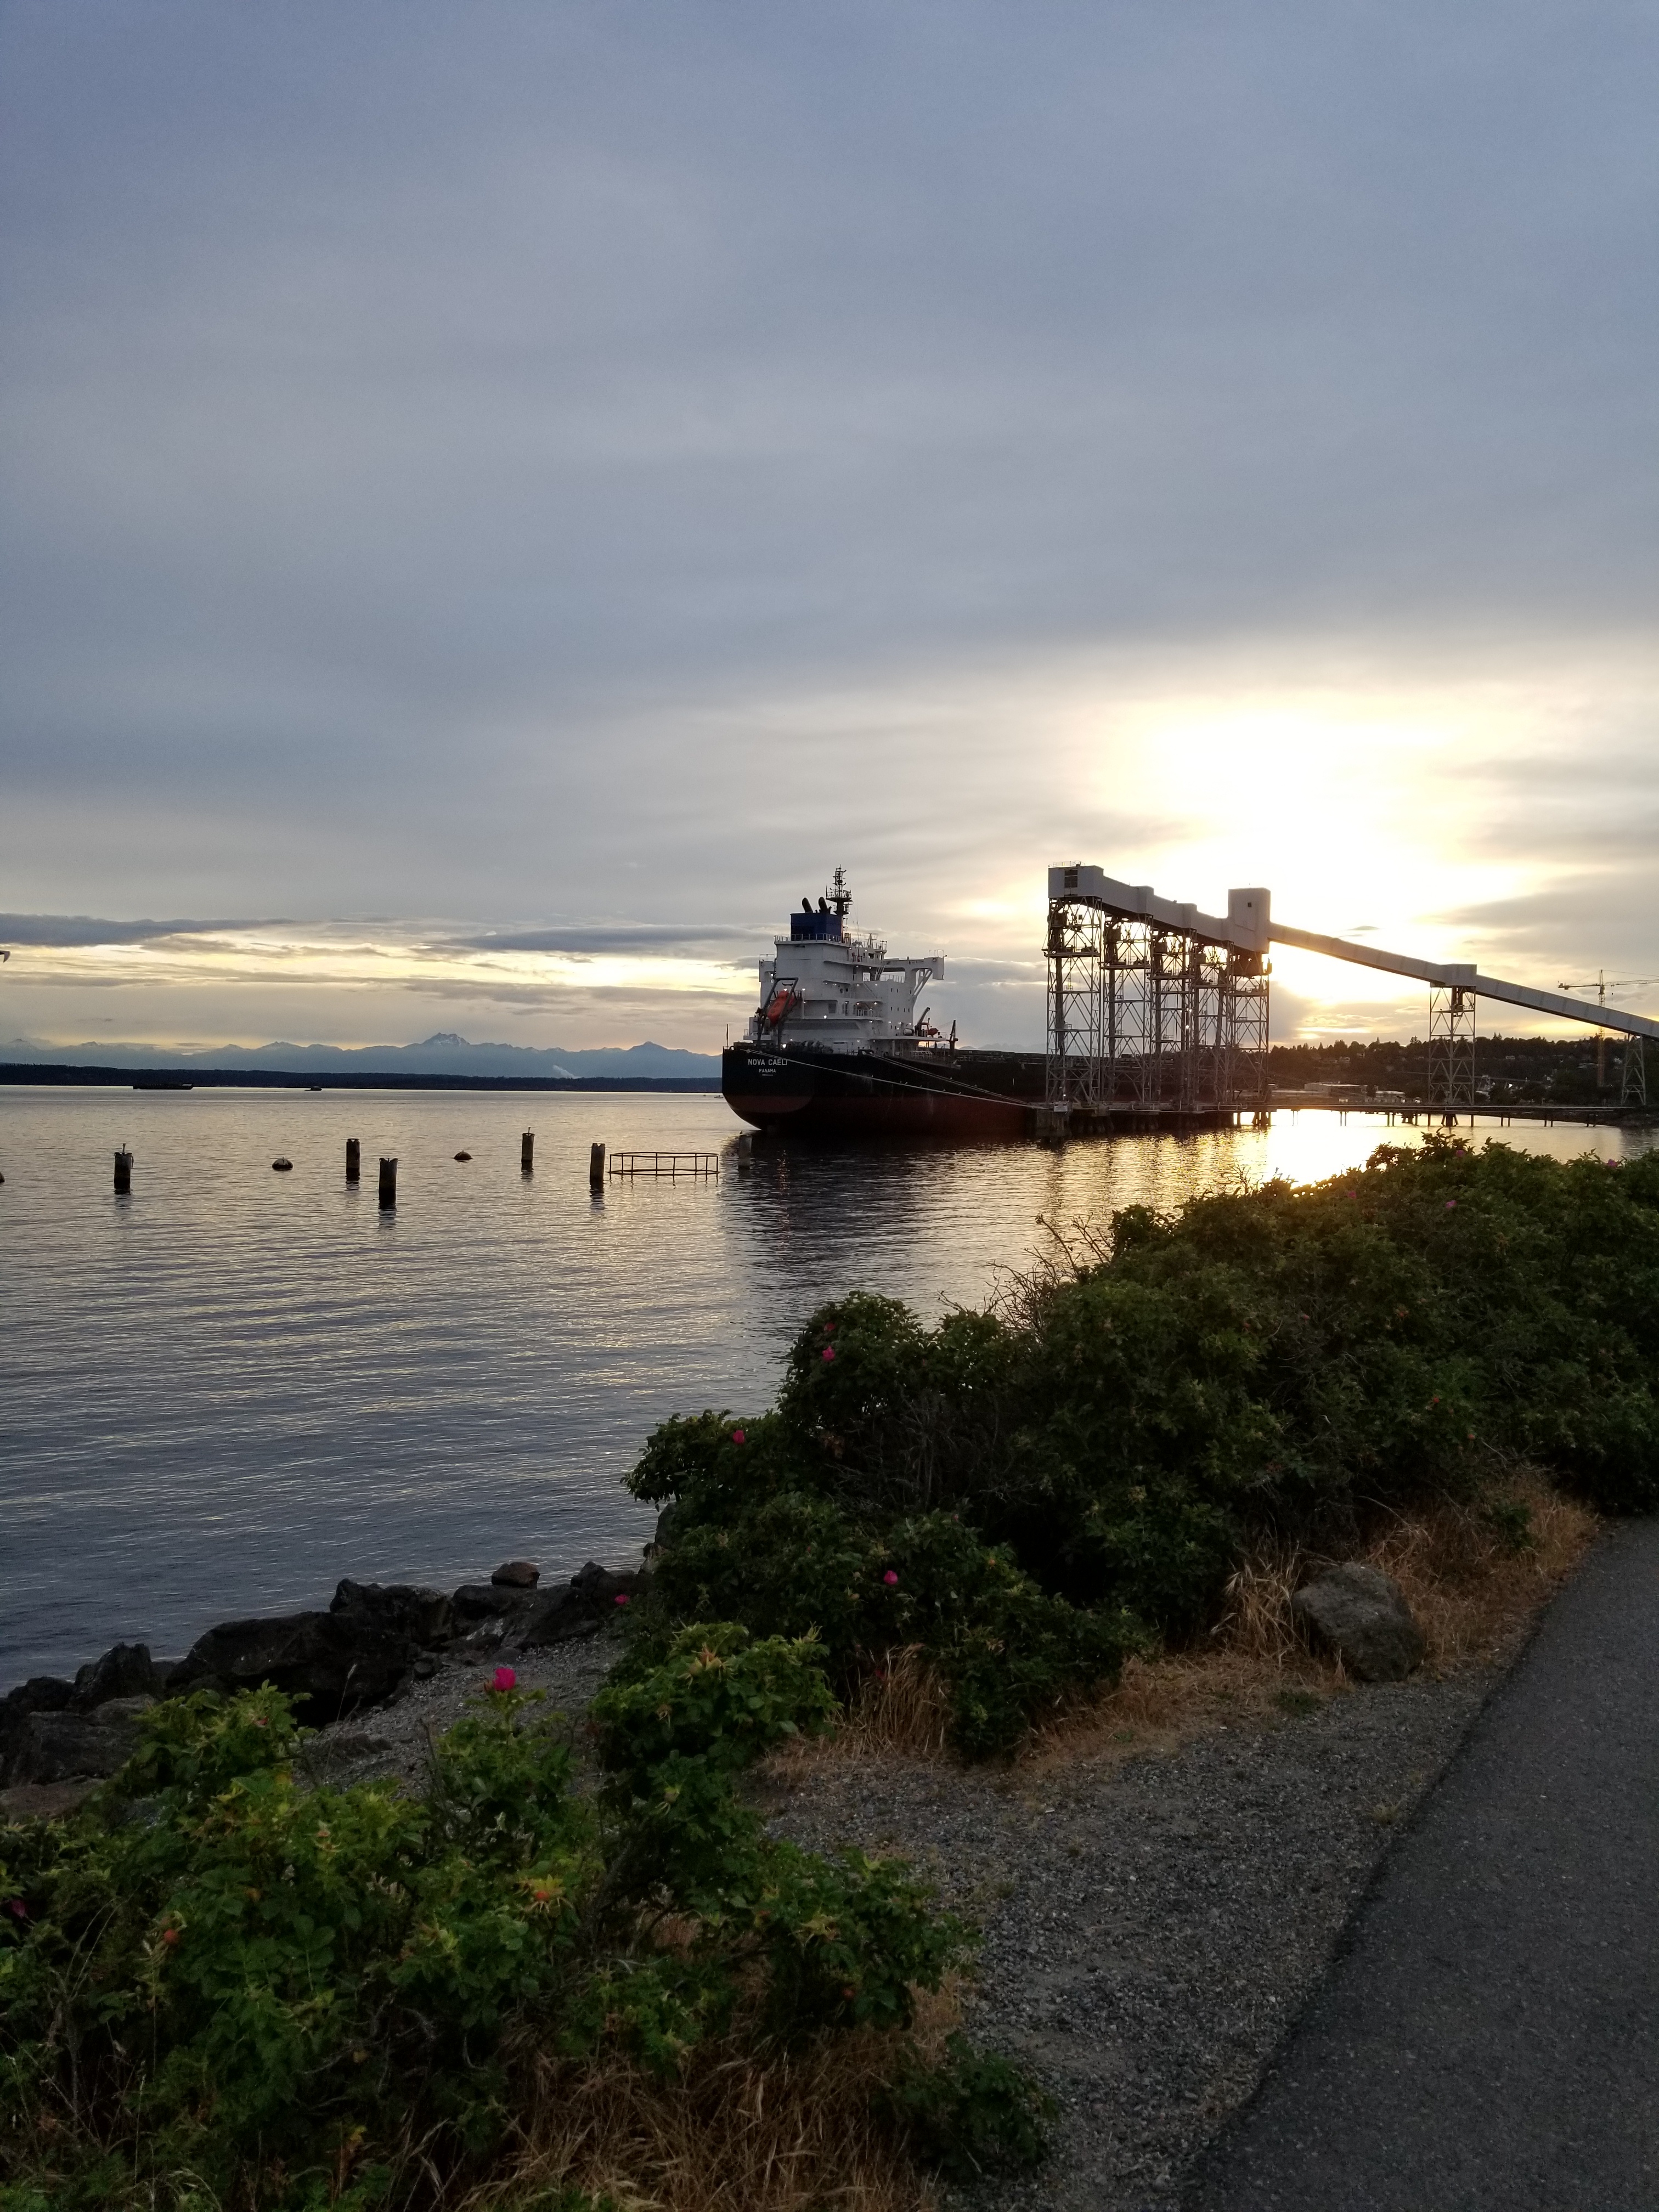 Elliot Bay in Seattle, setting sun casting a glow over the waters, with a ship in the background